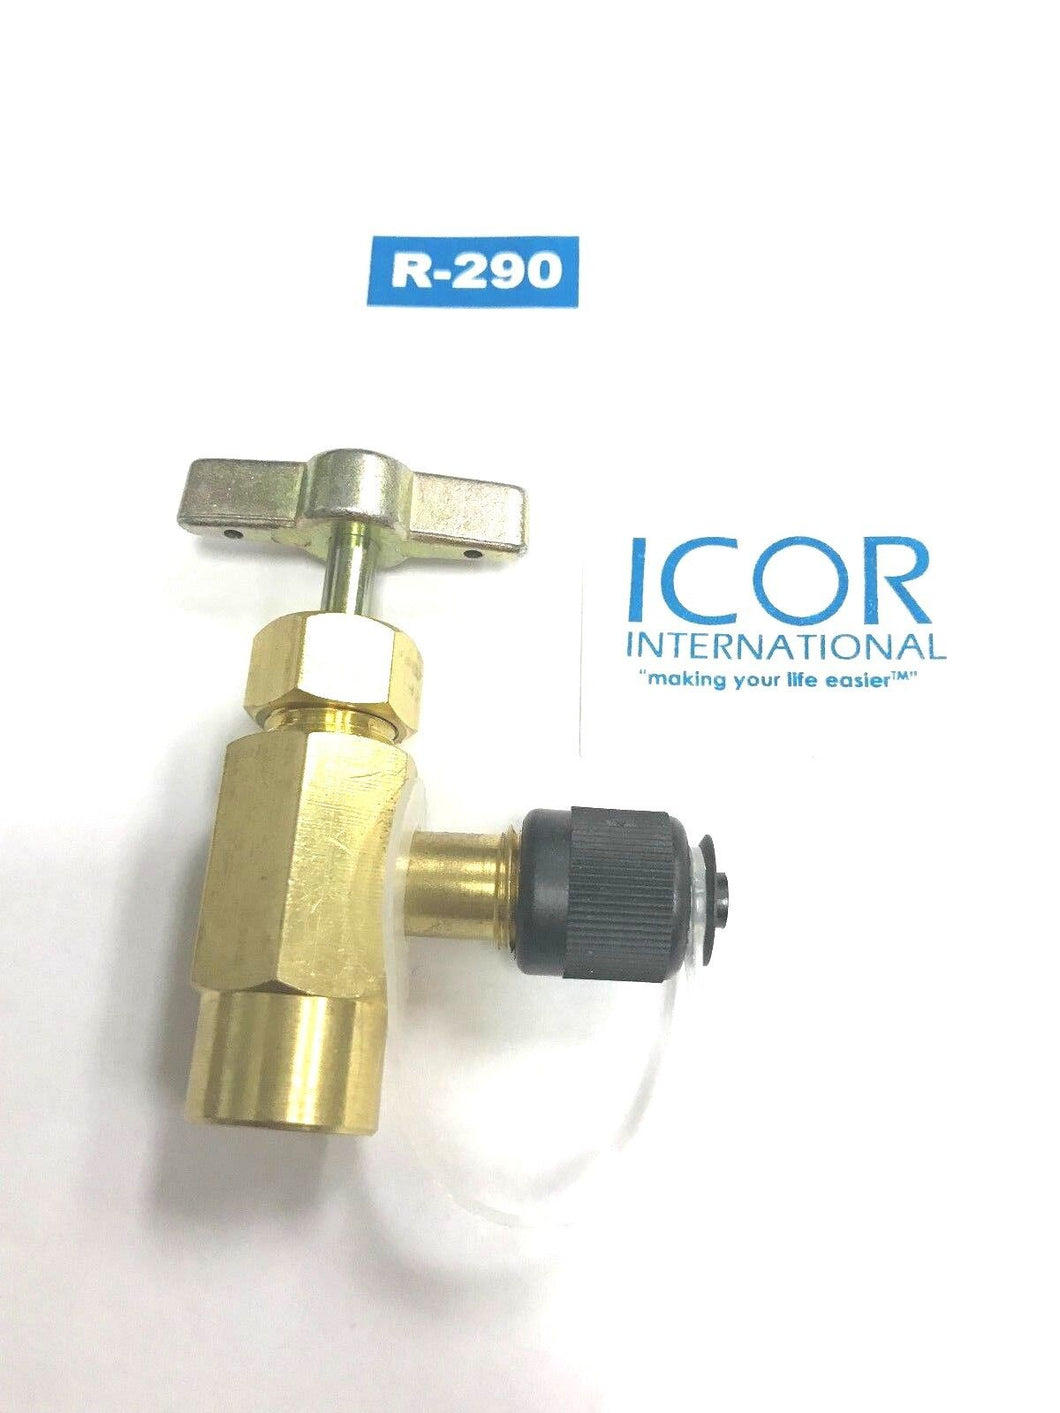 ICOR INTERNATIONAL INC, R290 Can Taper, Made For ICOR R290 Cans, HC-VLV-R290-S